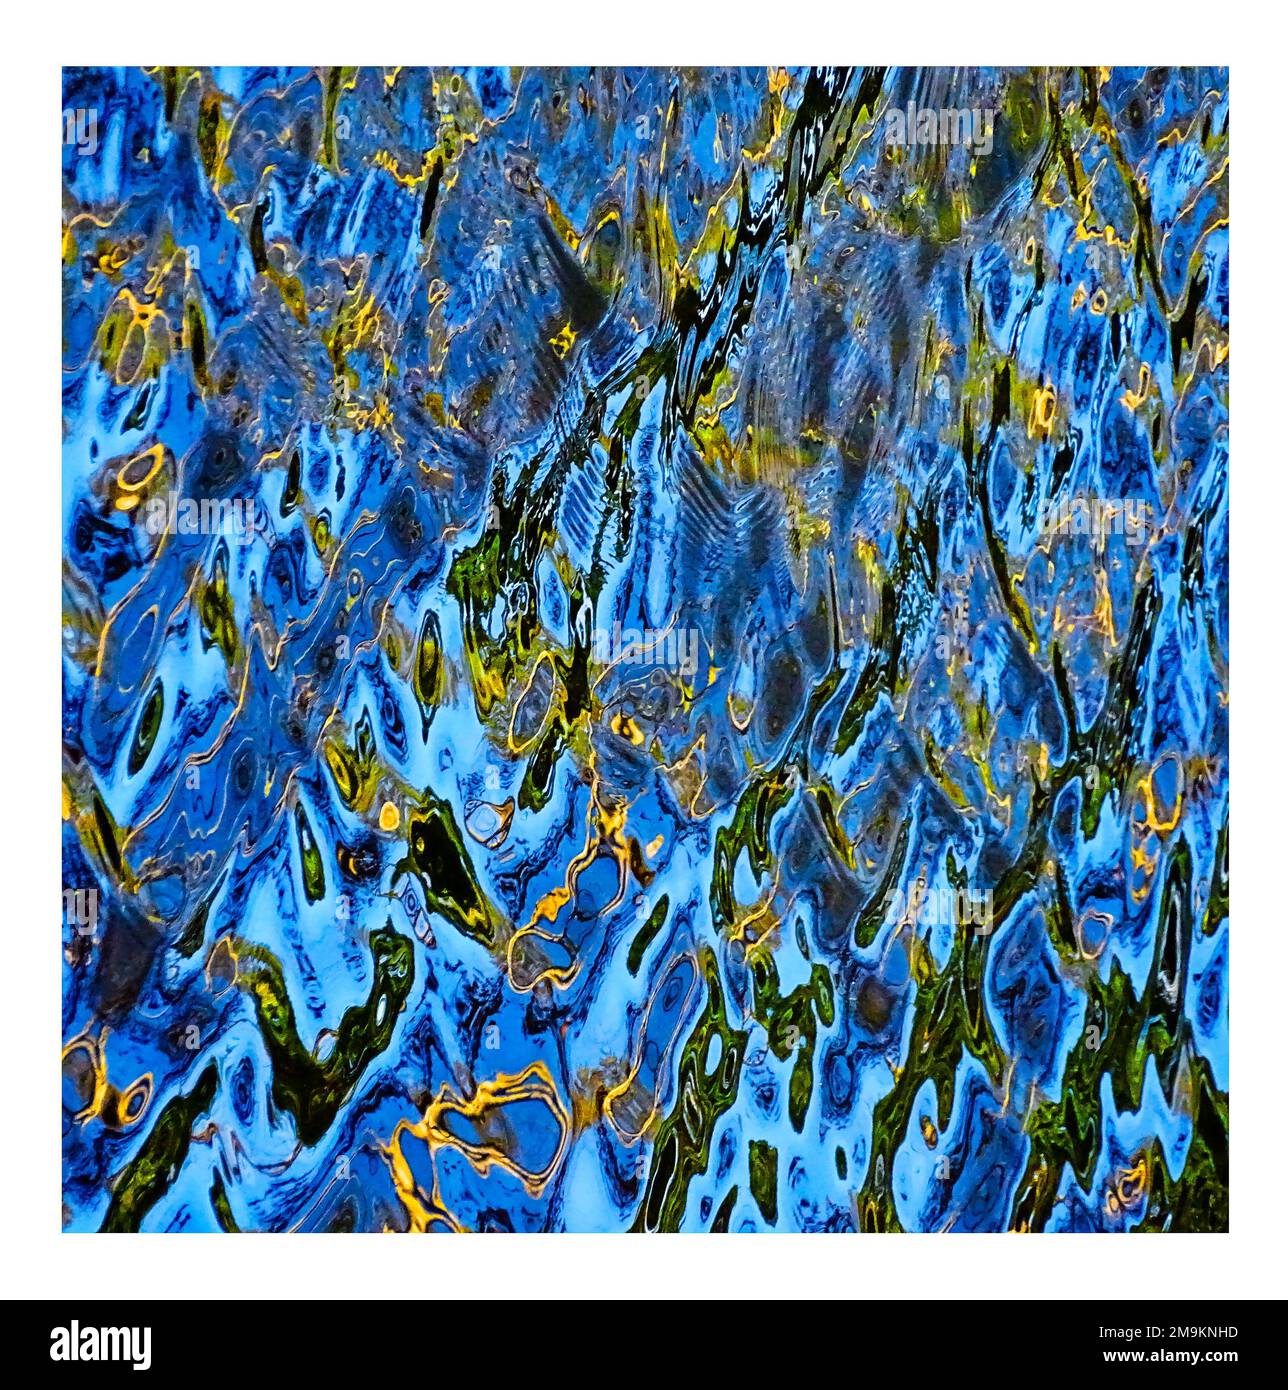 Abstract photograph of blue ripples and reflections in water Stock Photo